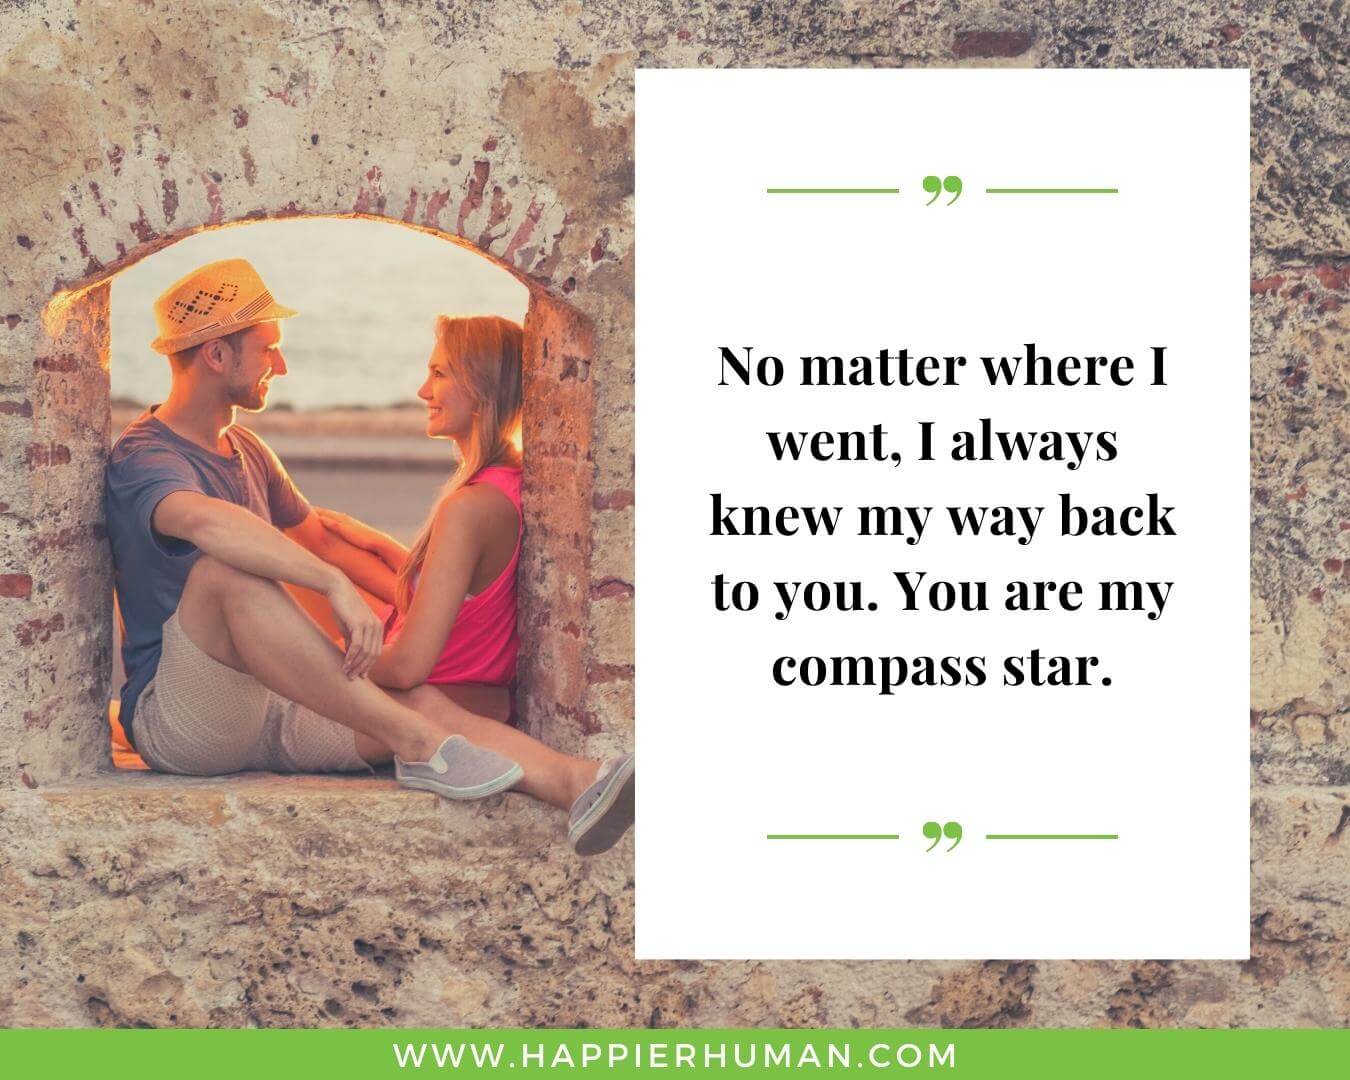 Loving quotes for wife or girlfriend - “No matter where I went, I always knew my way back to you. You are my compass star.”